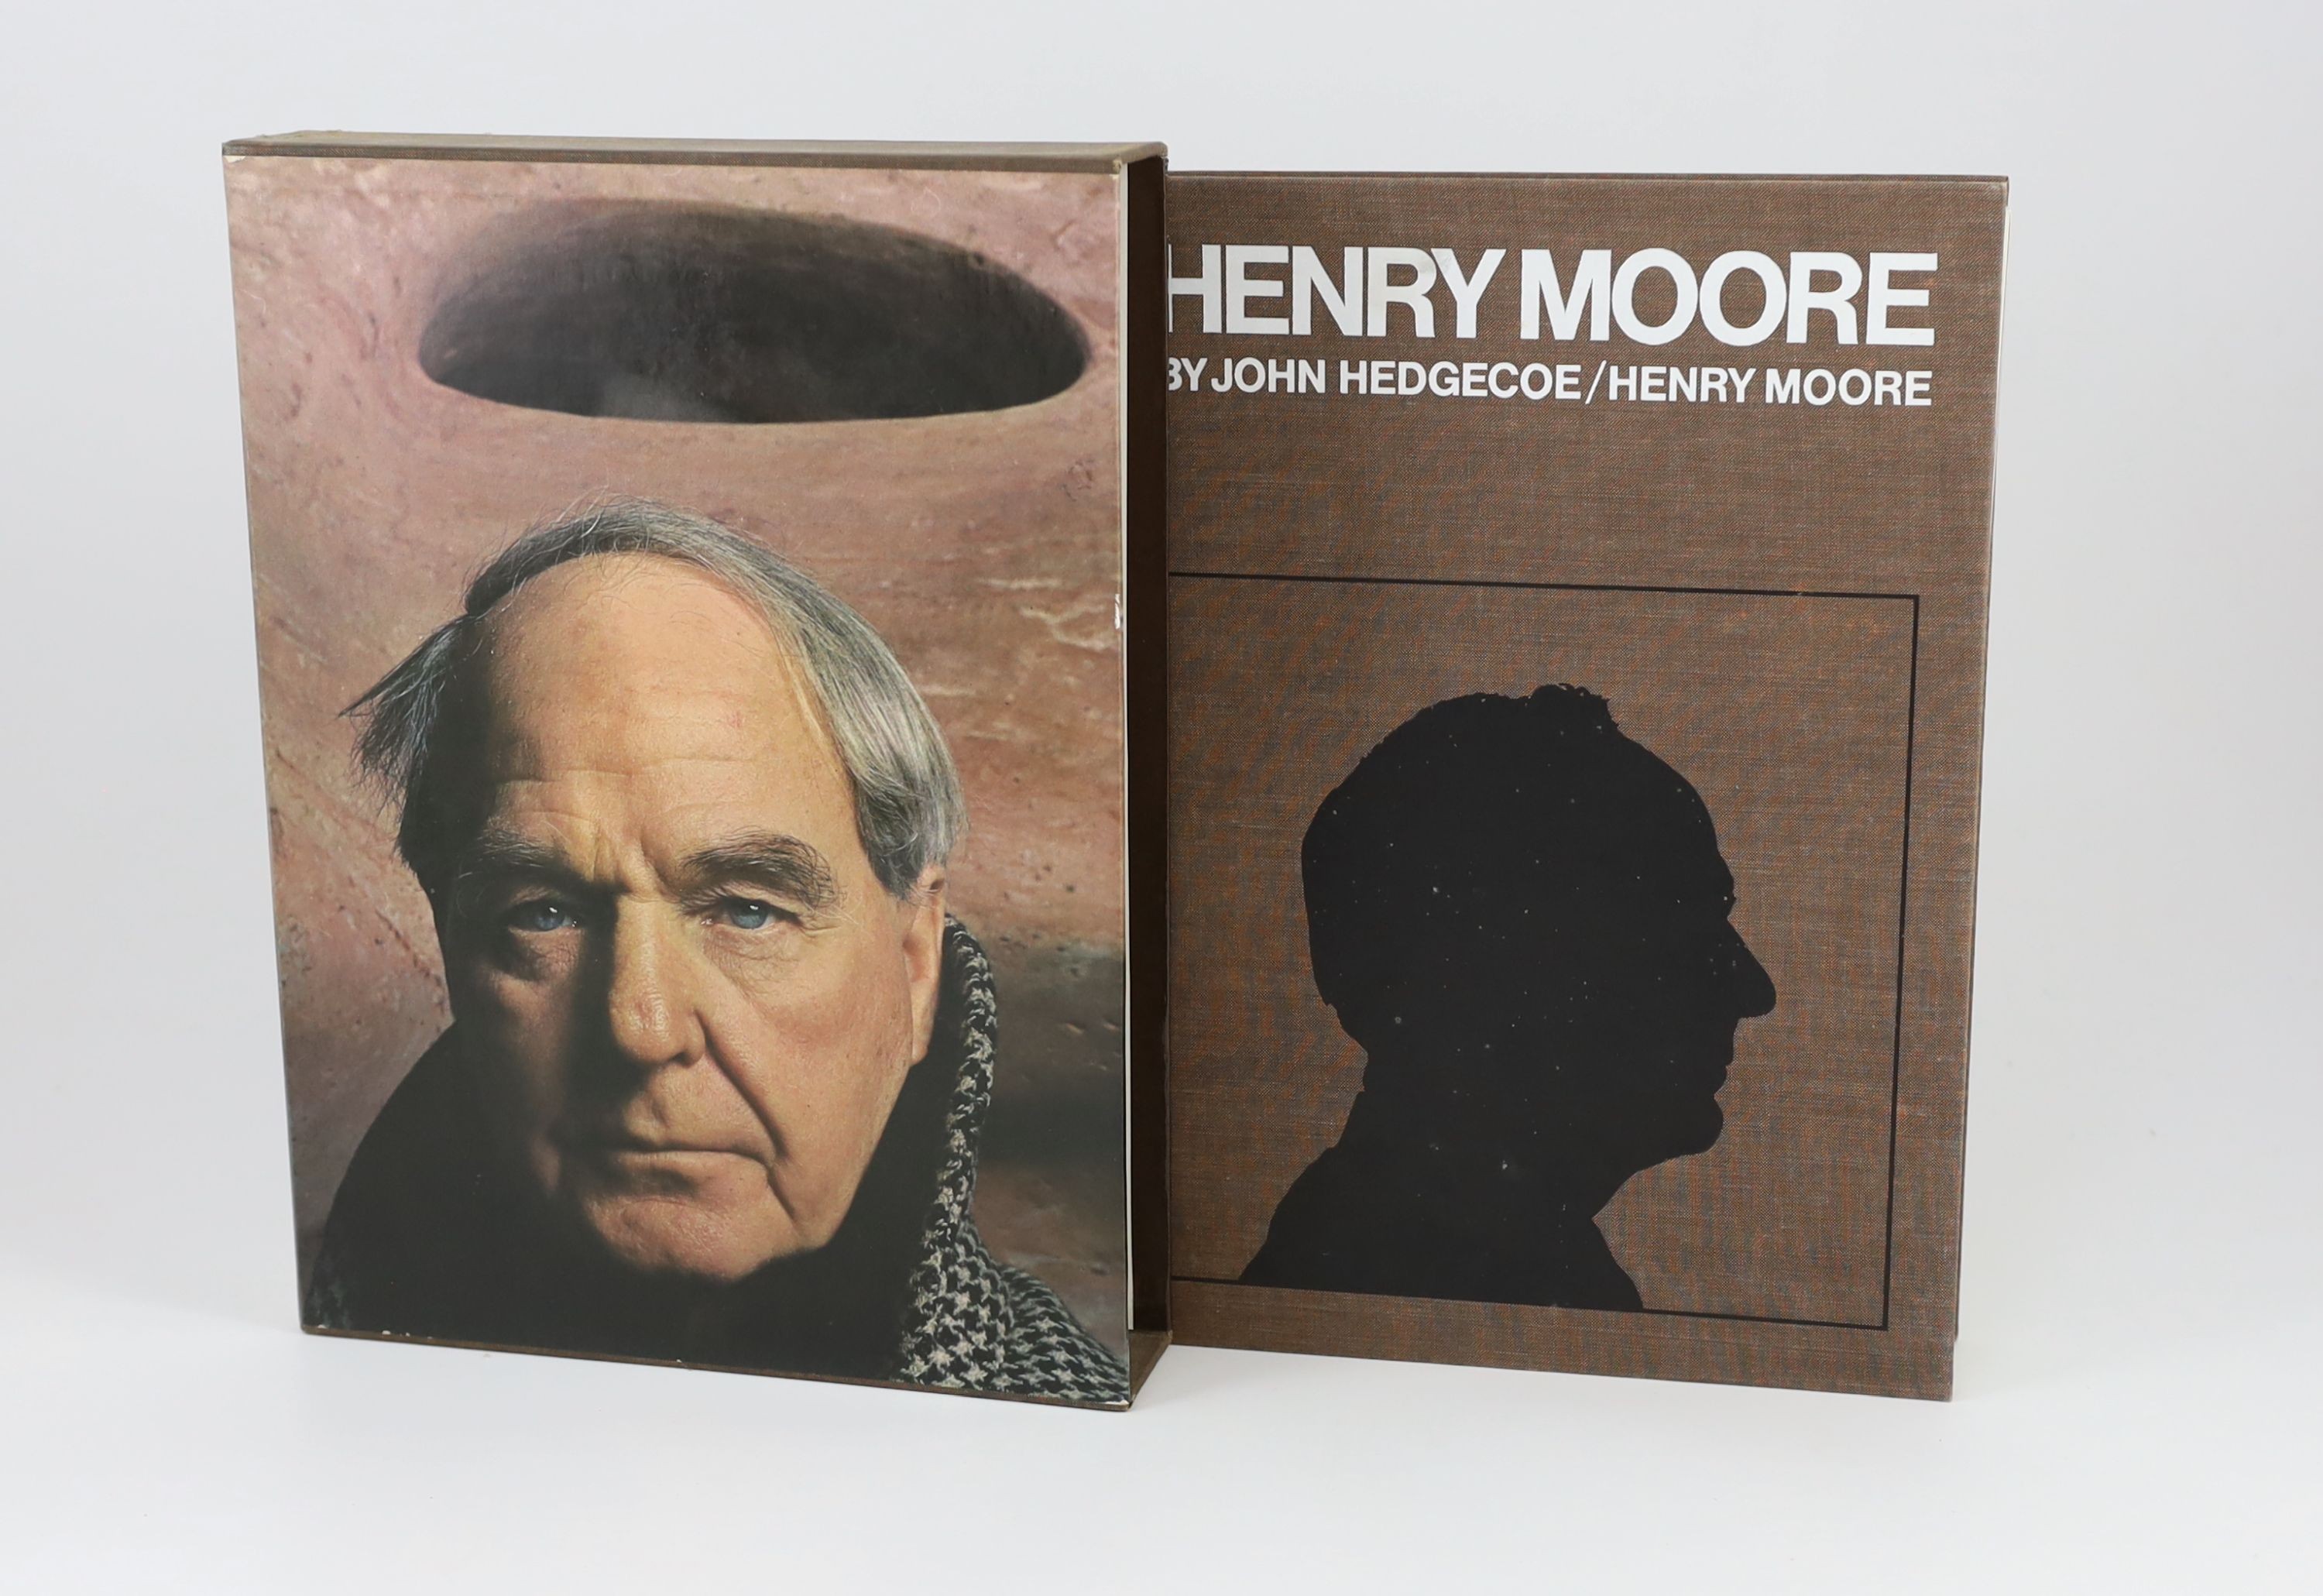 Hedgecoe, John - Henry Spencer Moore, 1st edition, with authors presentation inscription, dated 1971, Thomas Nelson, London, 1968, in slip case.